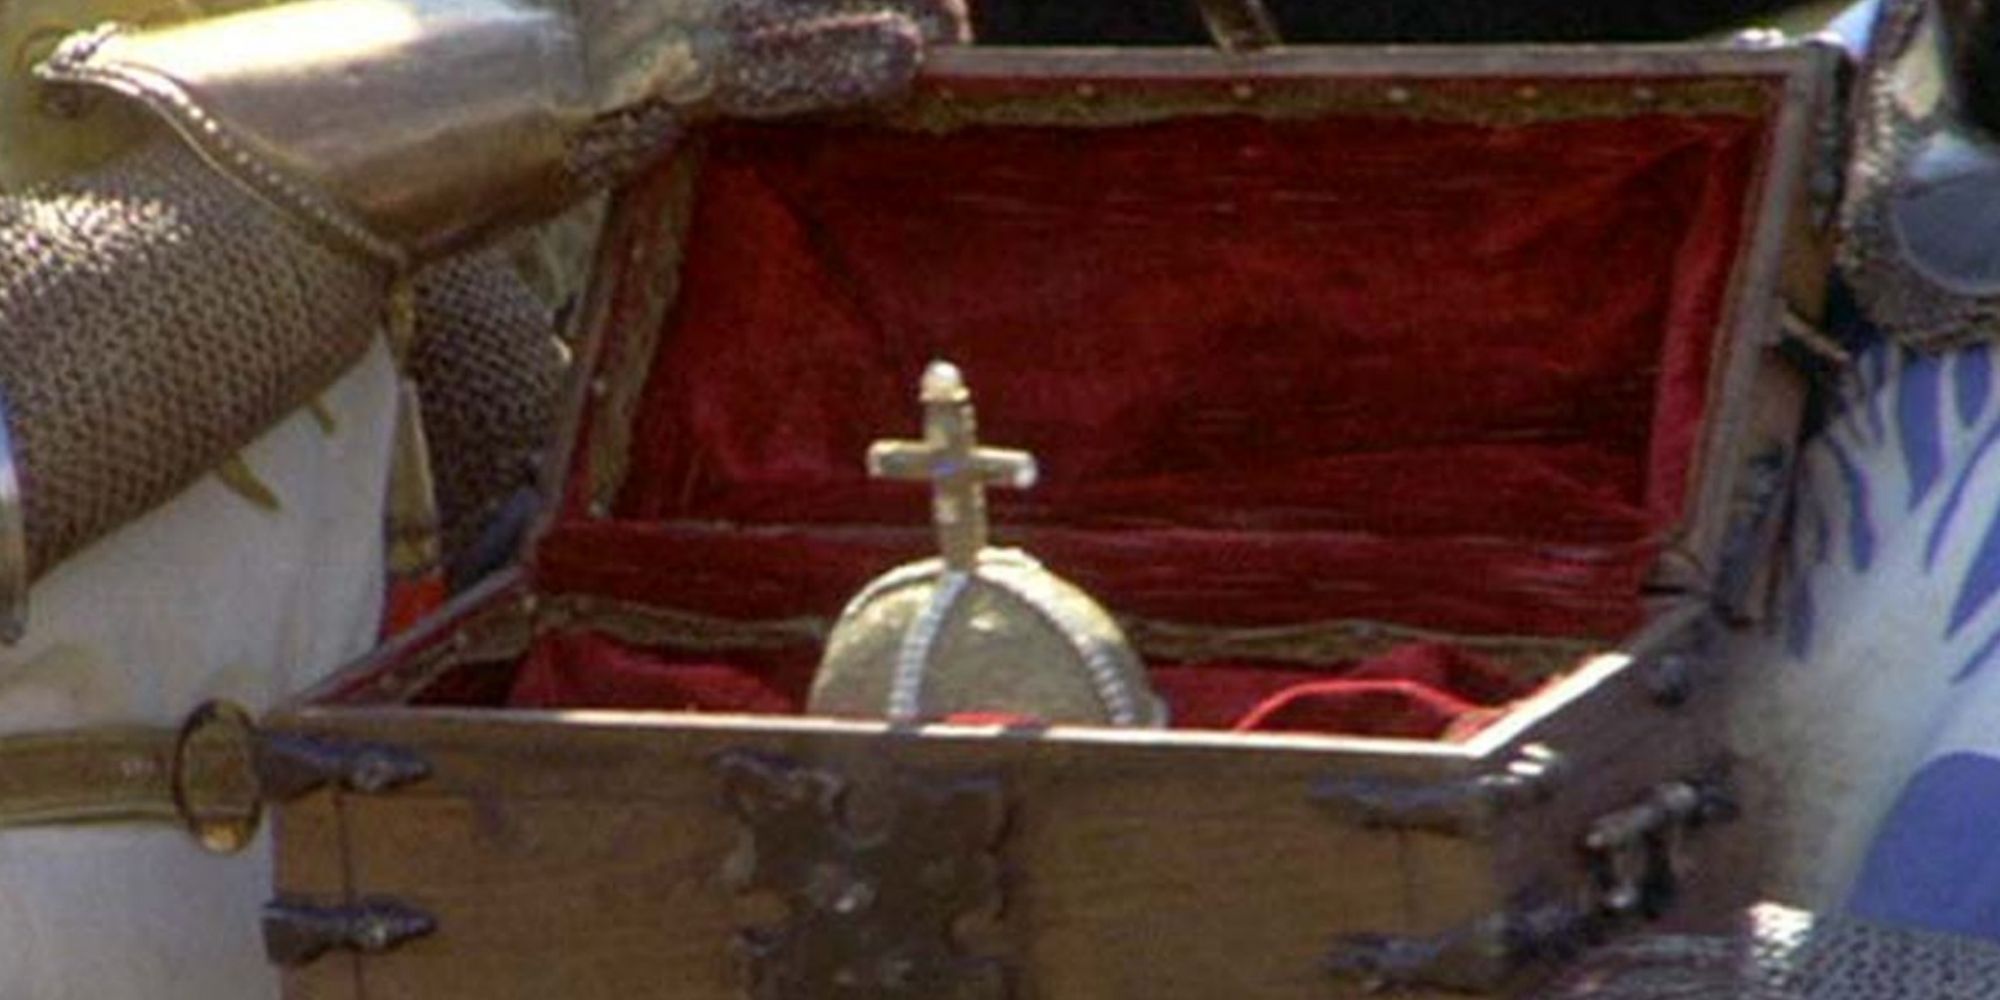 The Holy Hand Grenade of Antioch in its case from 'Monty Python and the Holy Grail'